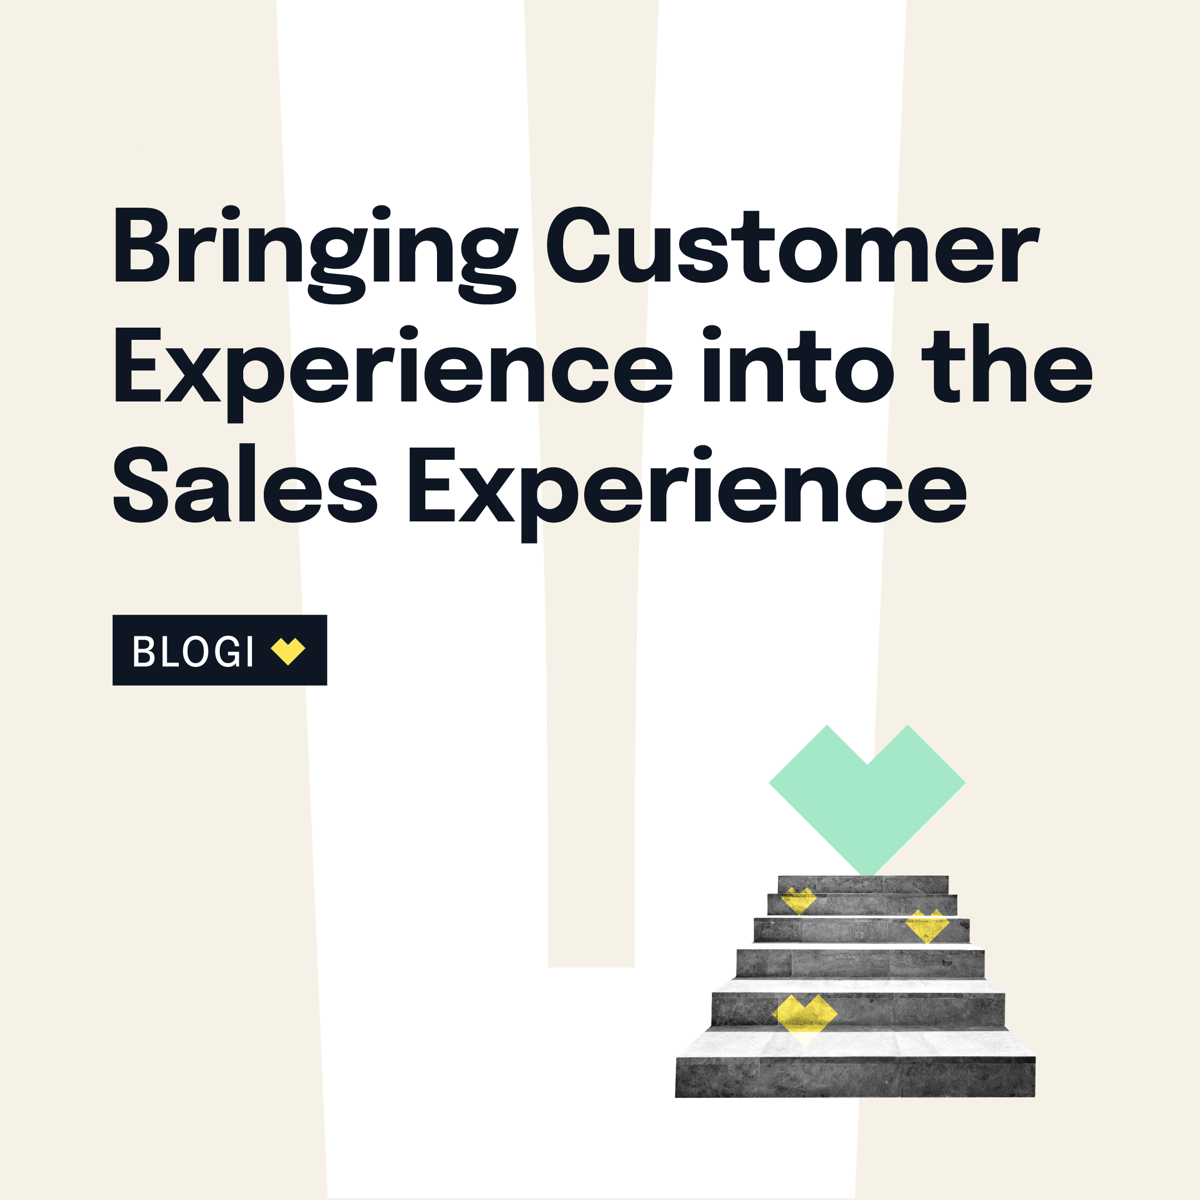 Bringing Customer Experience into the Sales Experience